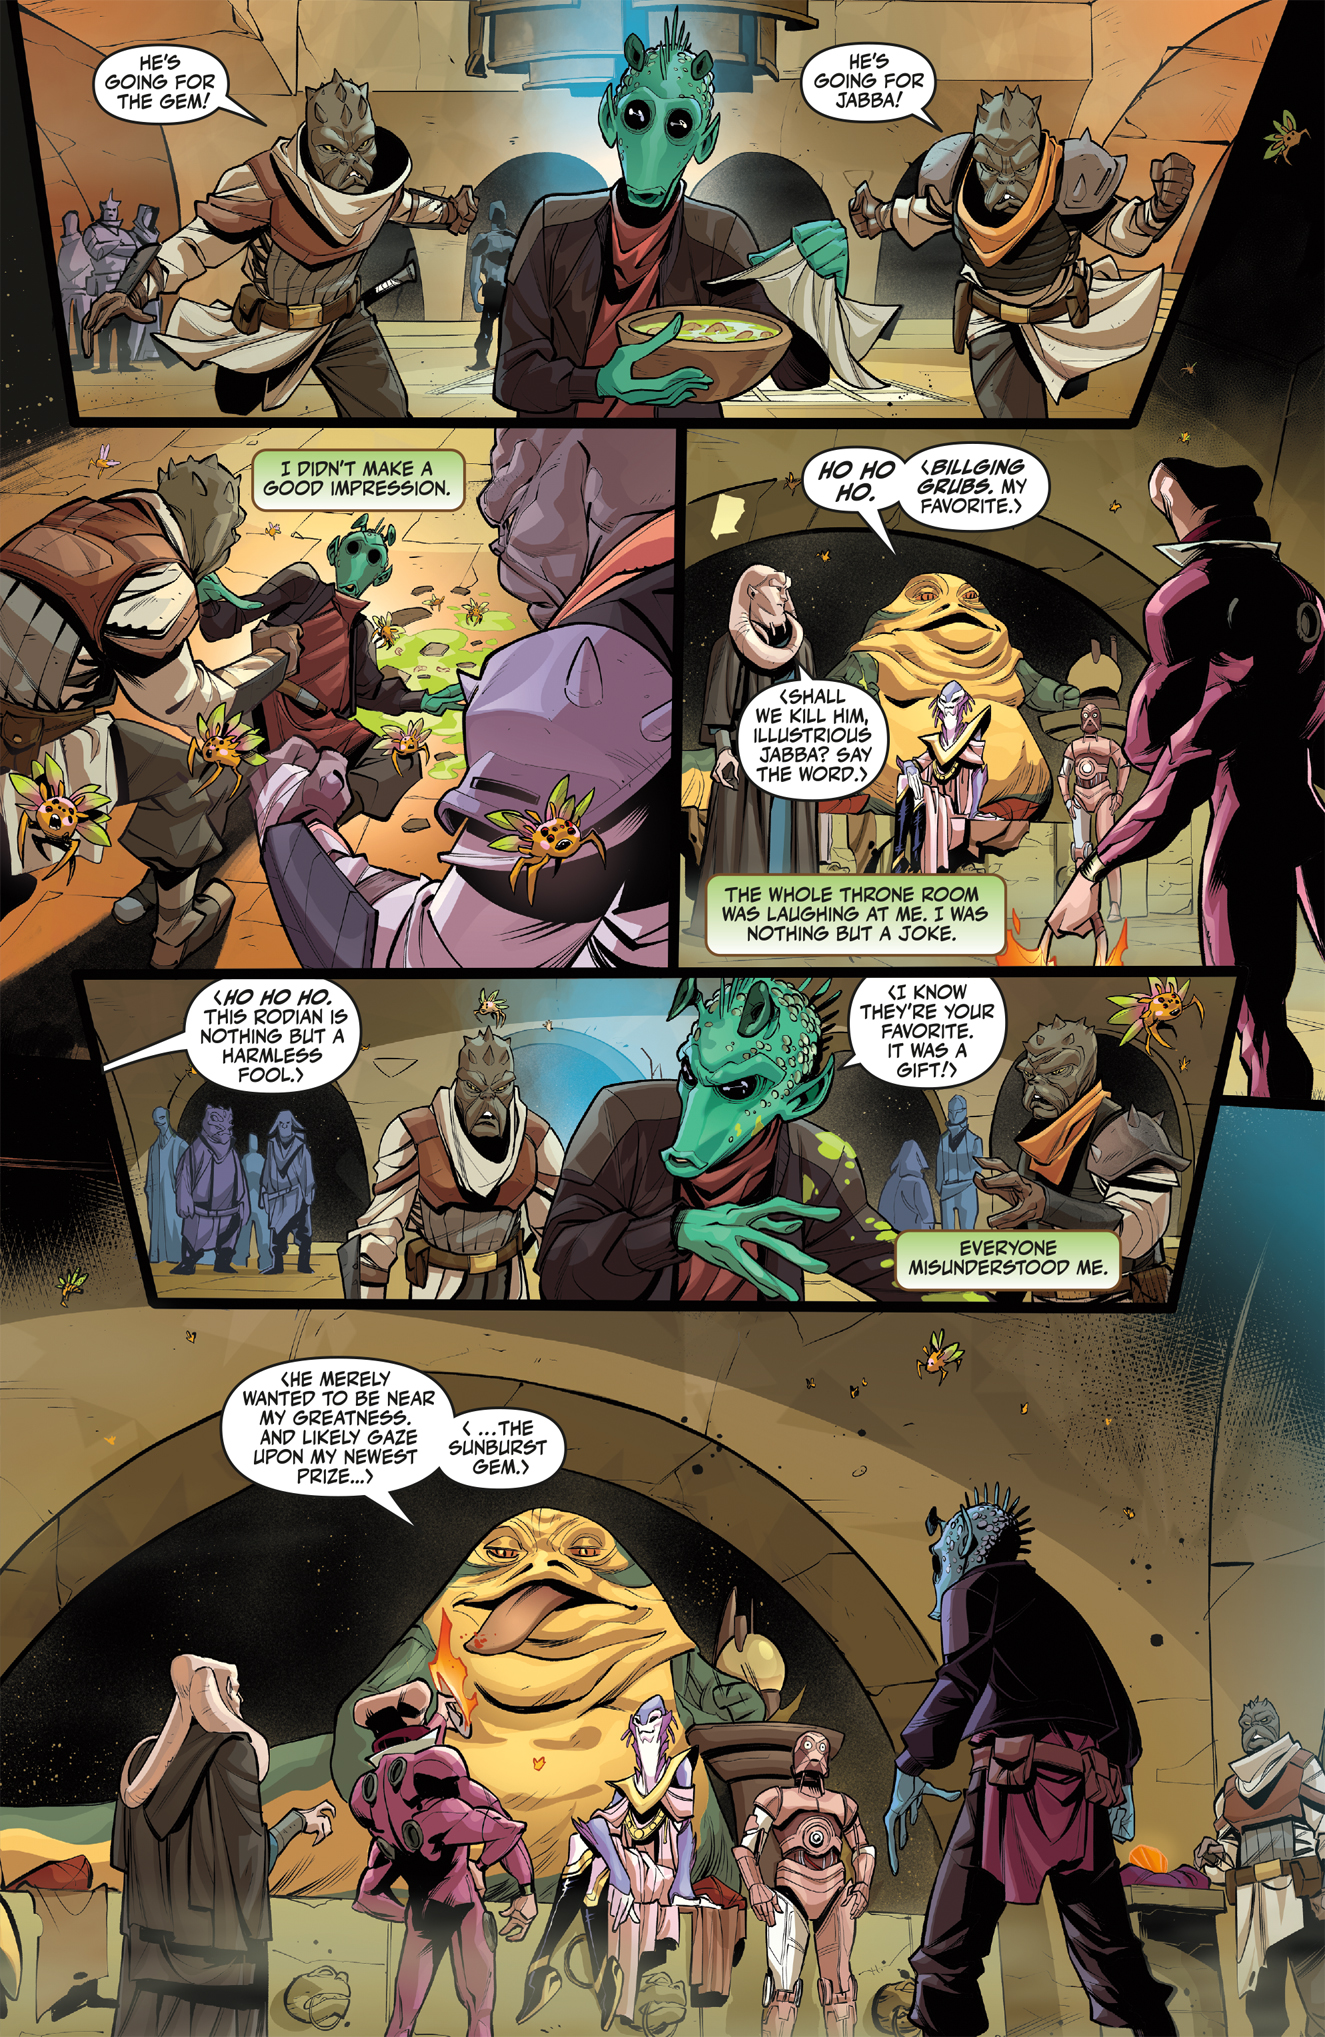 Hyperspace Stories Issue 6 Page 3 - Greedo falls